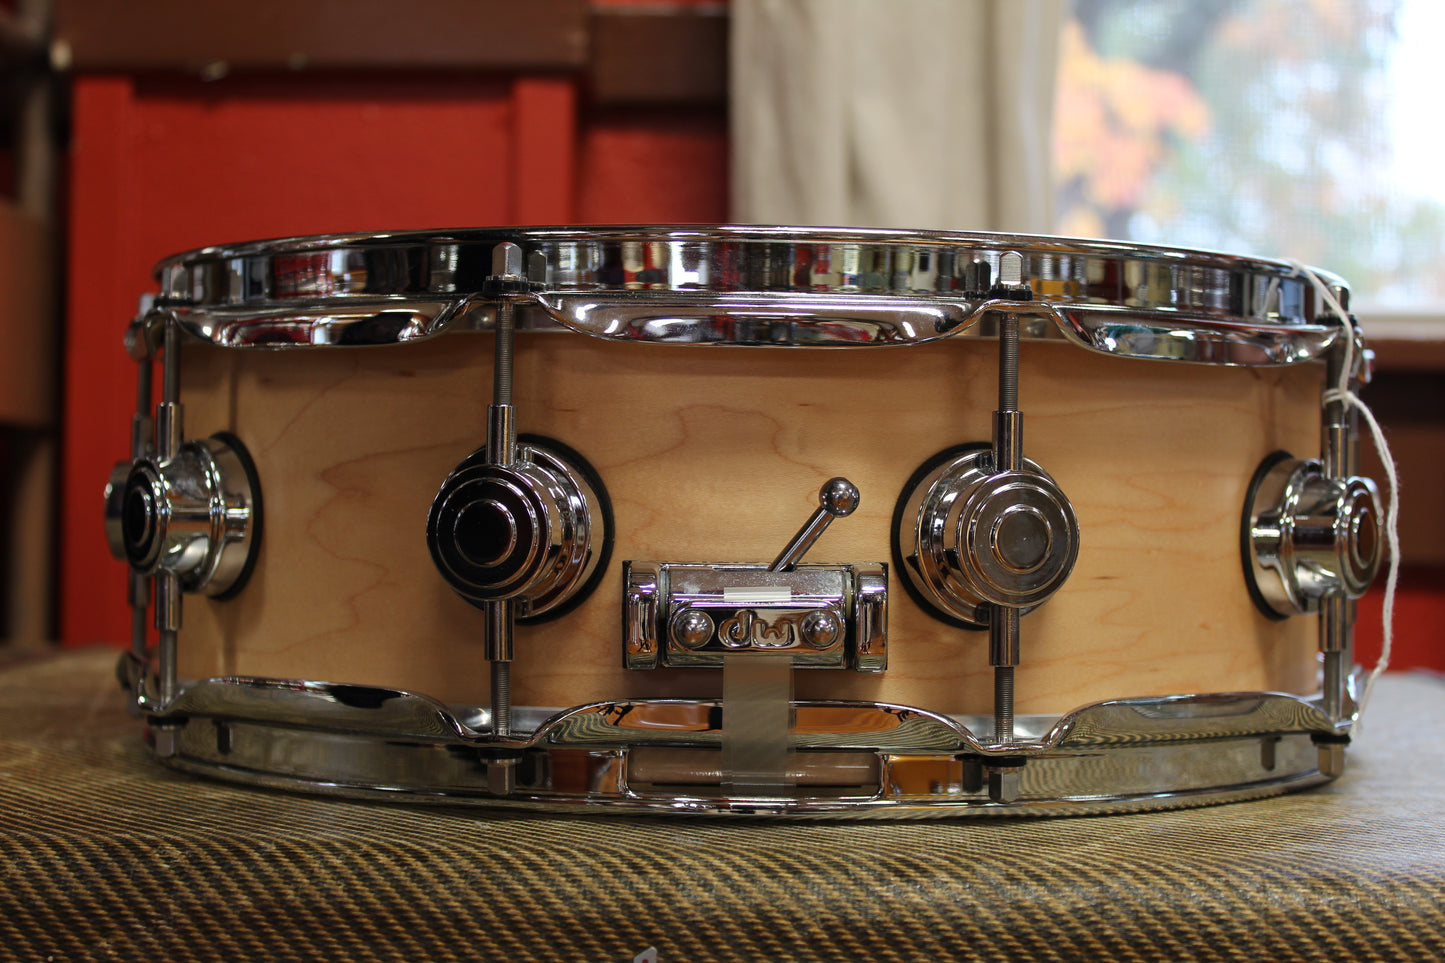 DW Collector's Maple Standard 5"x14 Snare Drum in Natural Maple